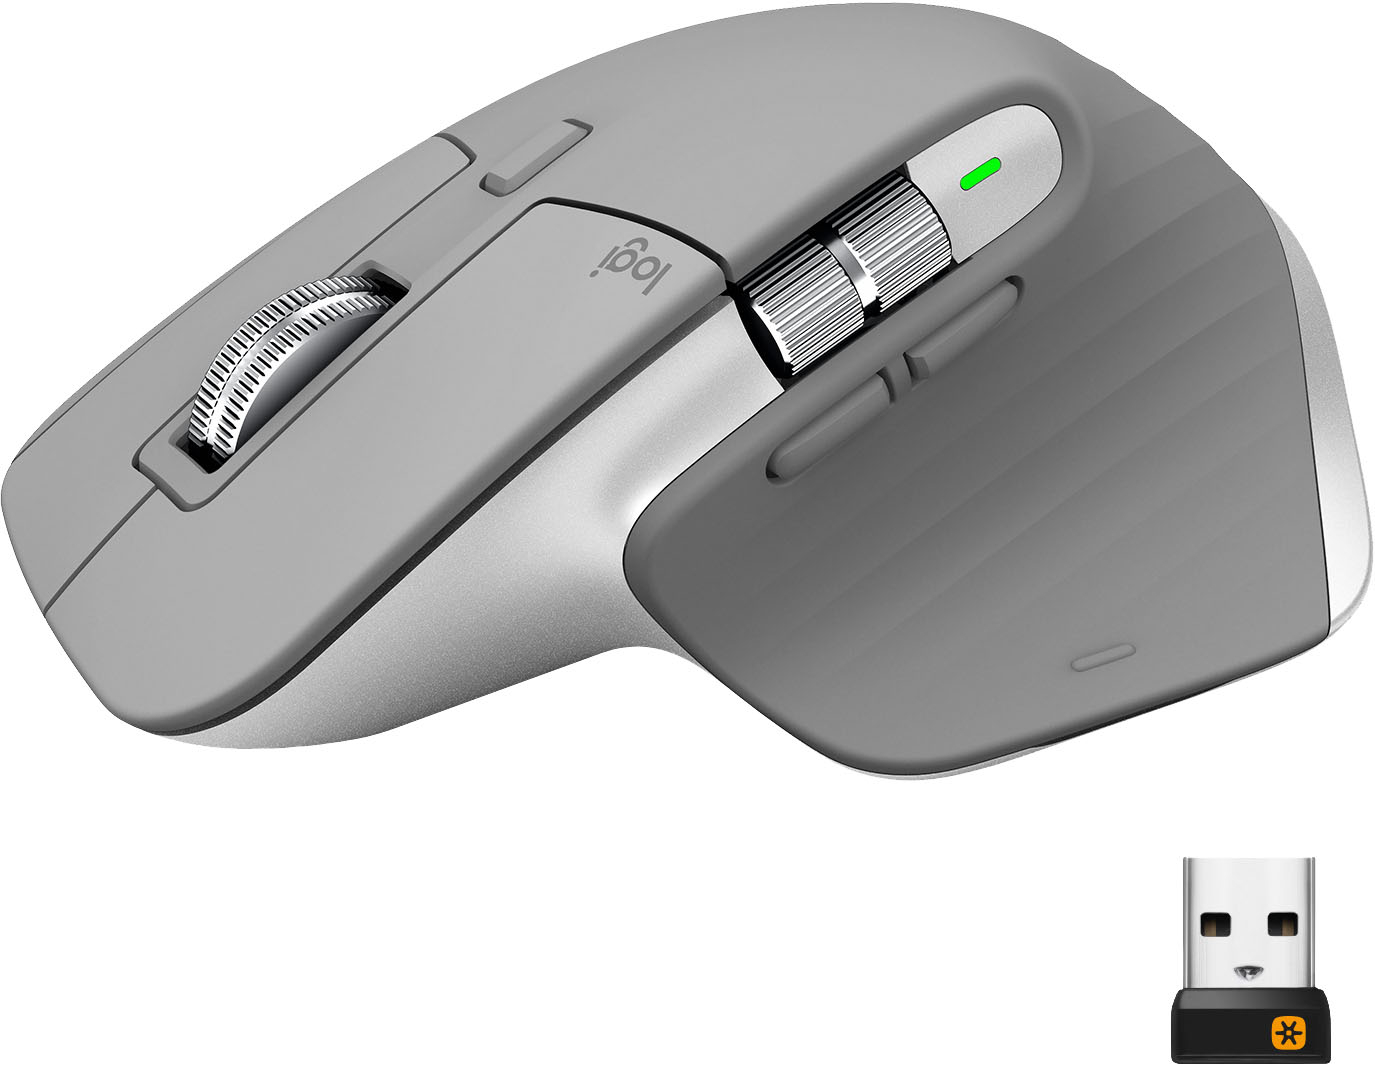 MX Master 3 Advanced Wireless USB/Bluetooth Laser Mouse with Ultrafast Scrolling Mid Gray 910-005692 - Best Buy